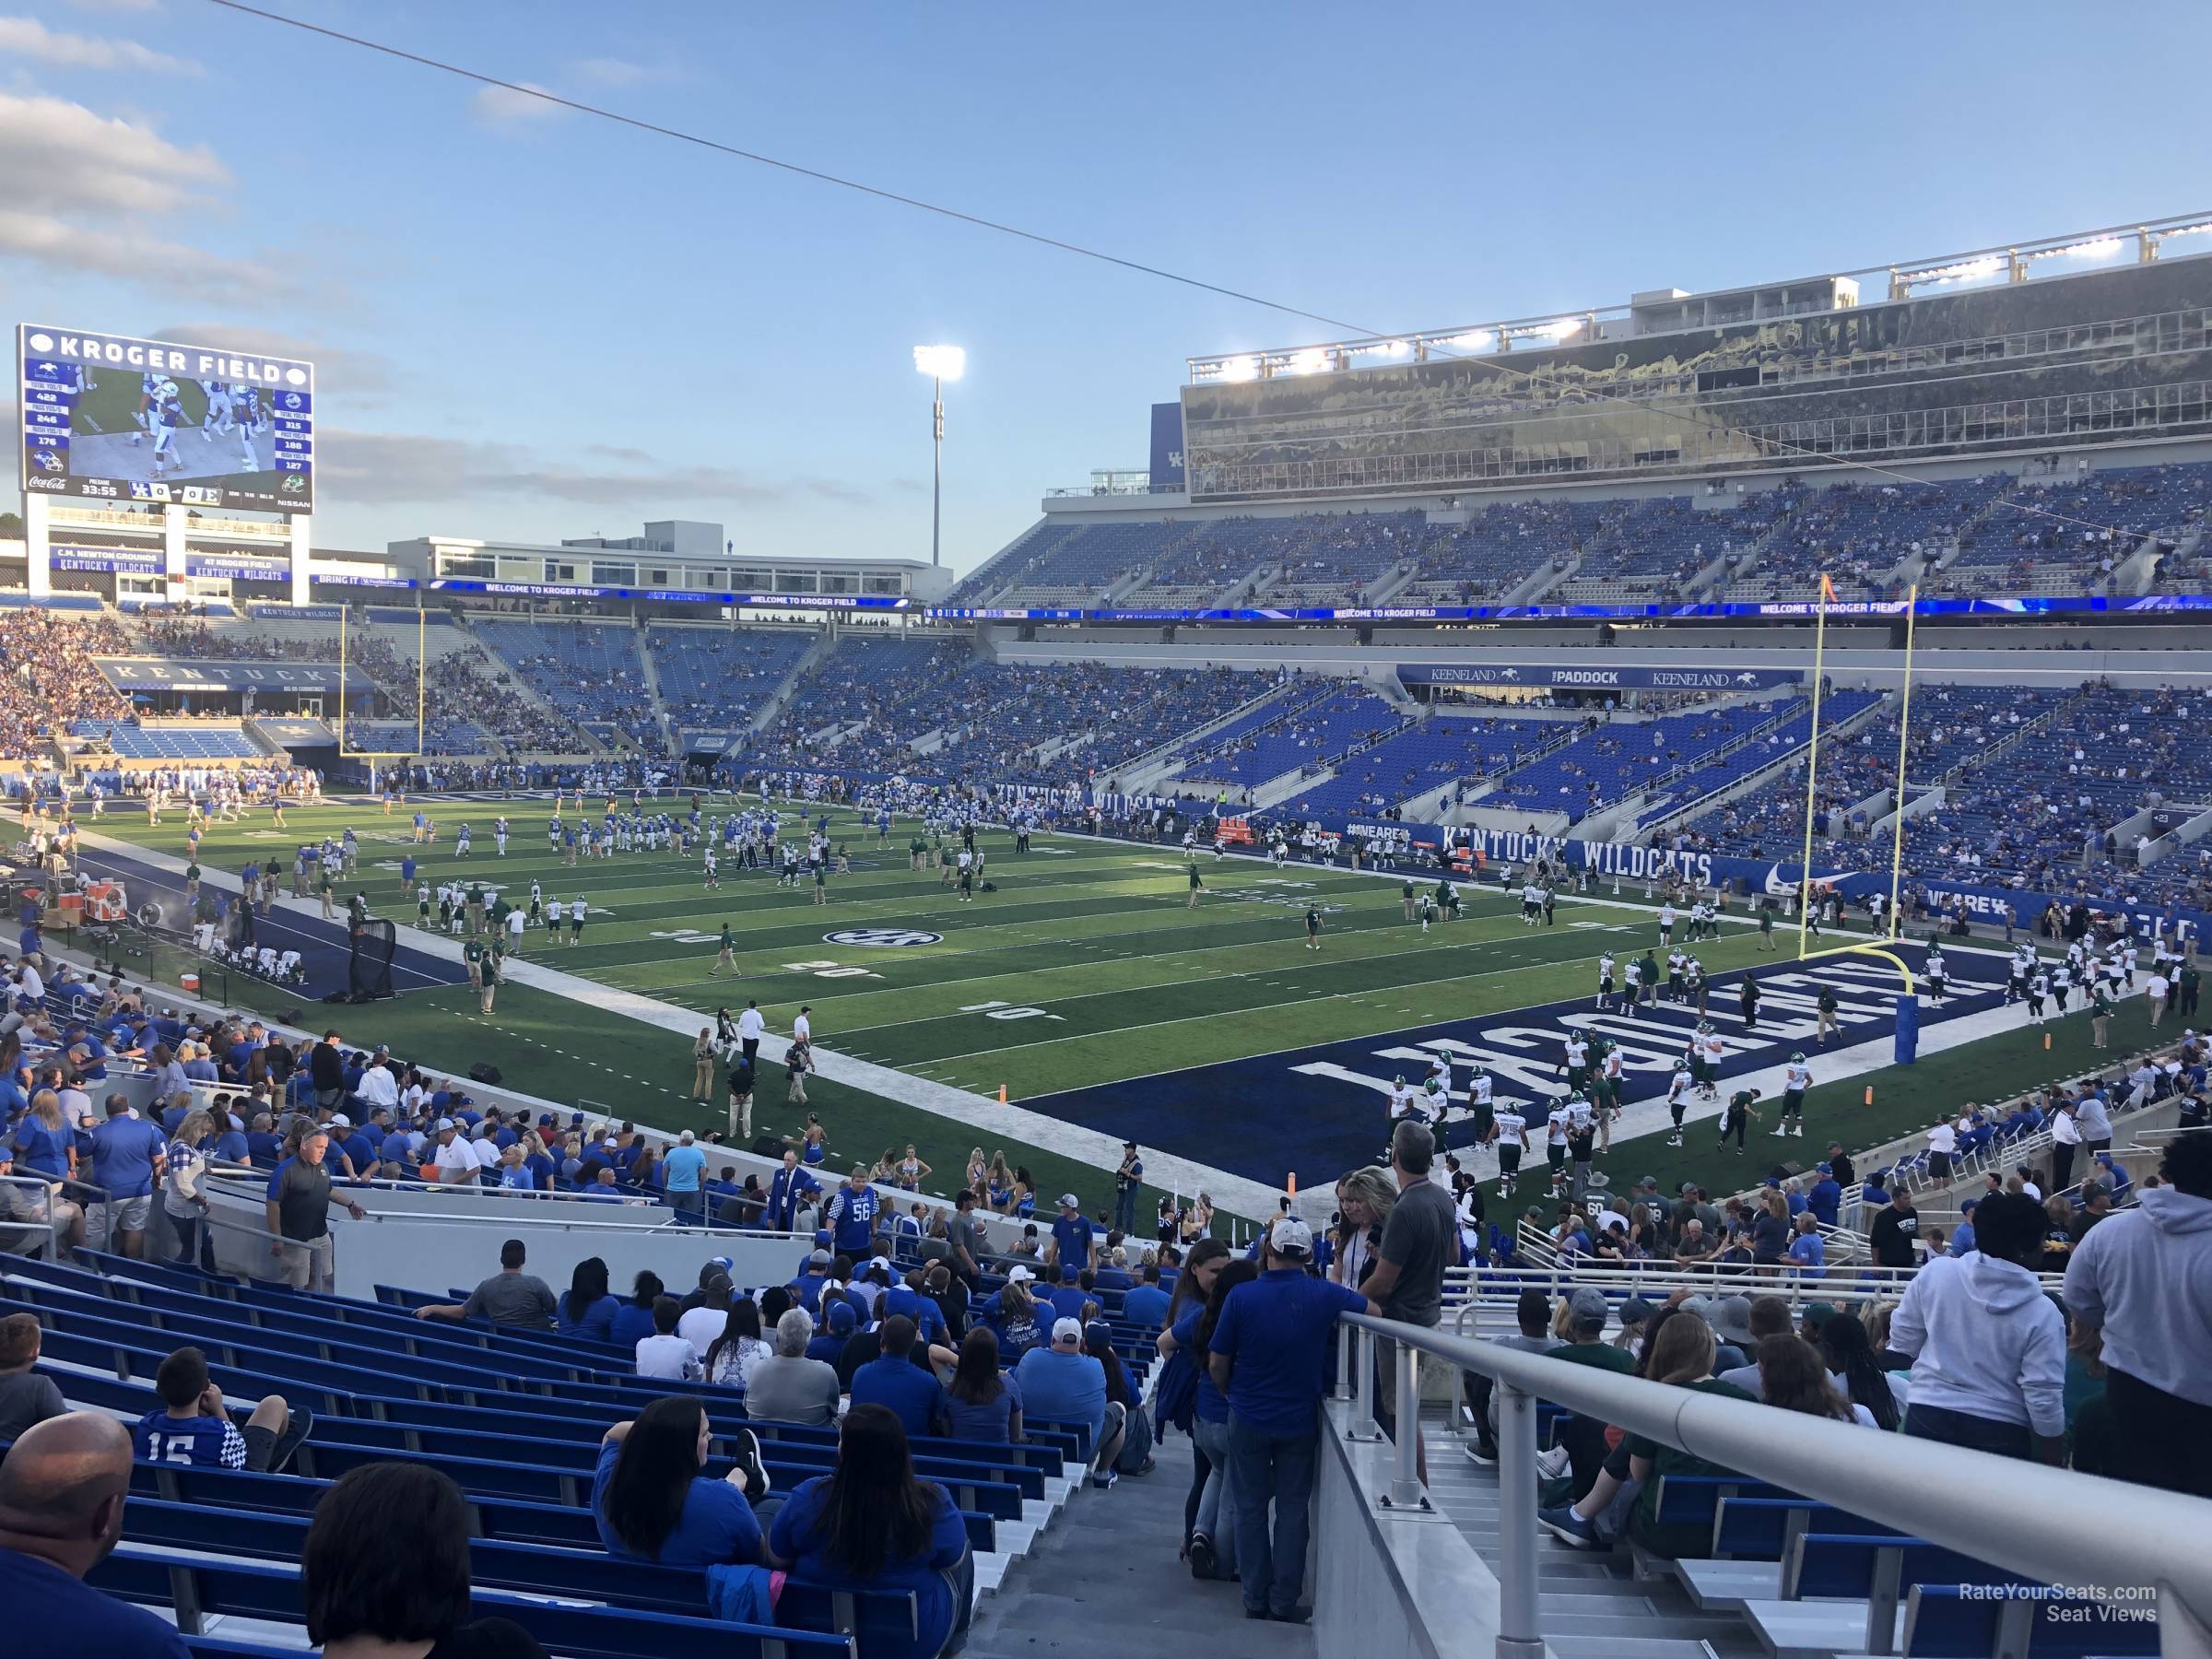 section 11, row 35 seat view  - kroger field